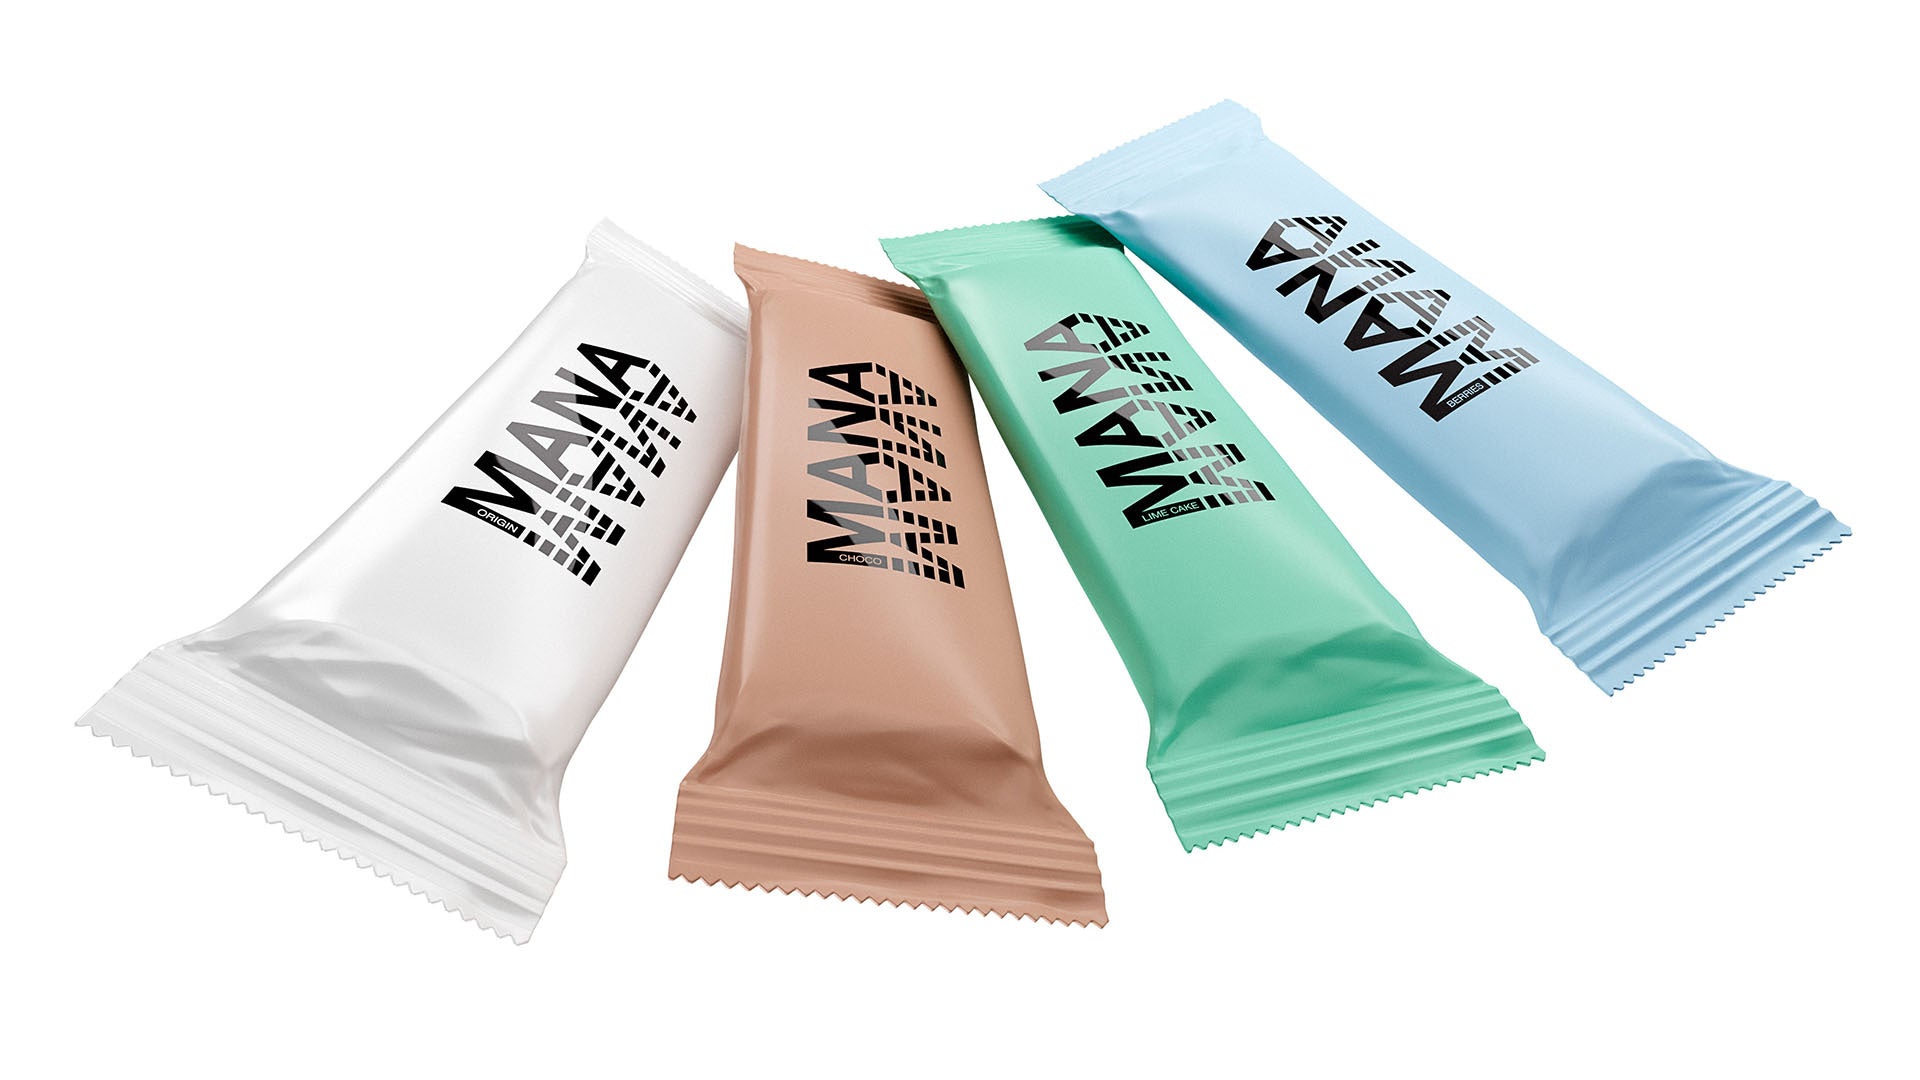 Our nutritionally complete ManaBar is here.